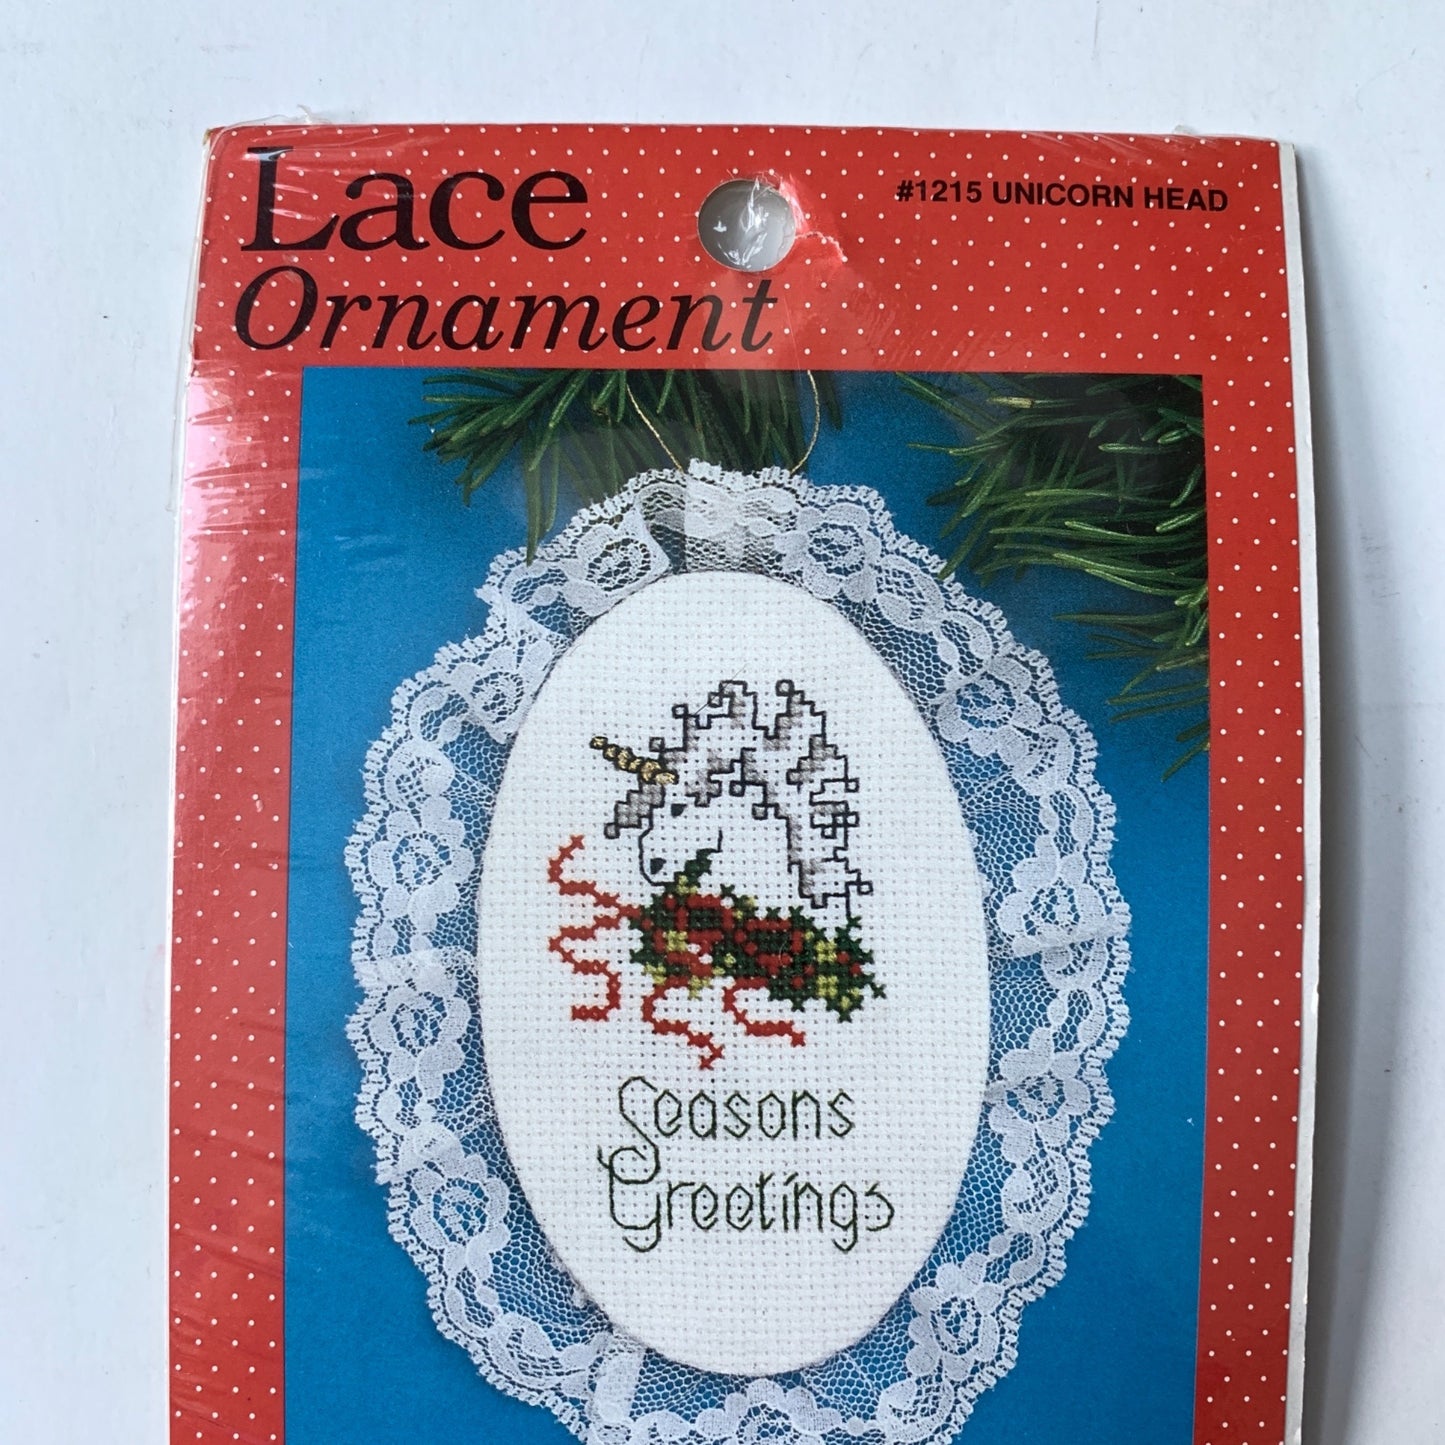 DESIGNS FROM THE NEEDLE CHRISTMAS LACE ORNAMENT CROSS STITCH KIT "UNICORN"